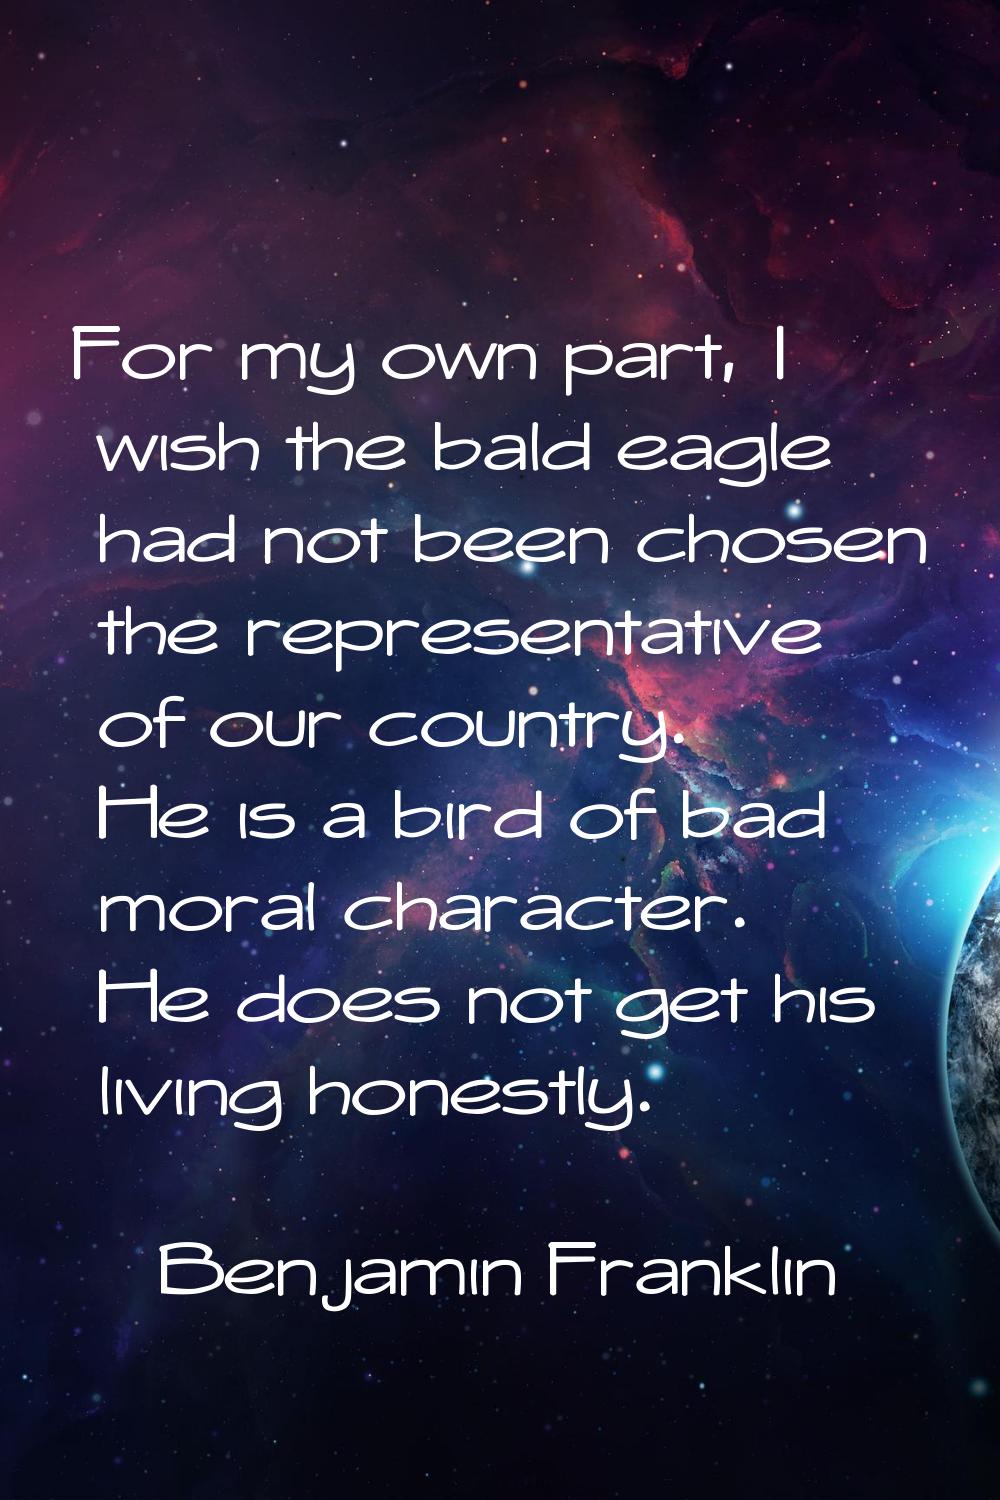 For my own part, I wish the bald eagle had not been chosen the representative of our country. He is